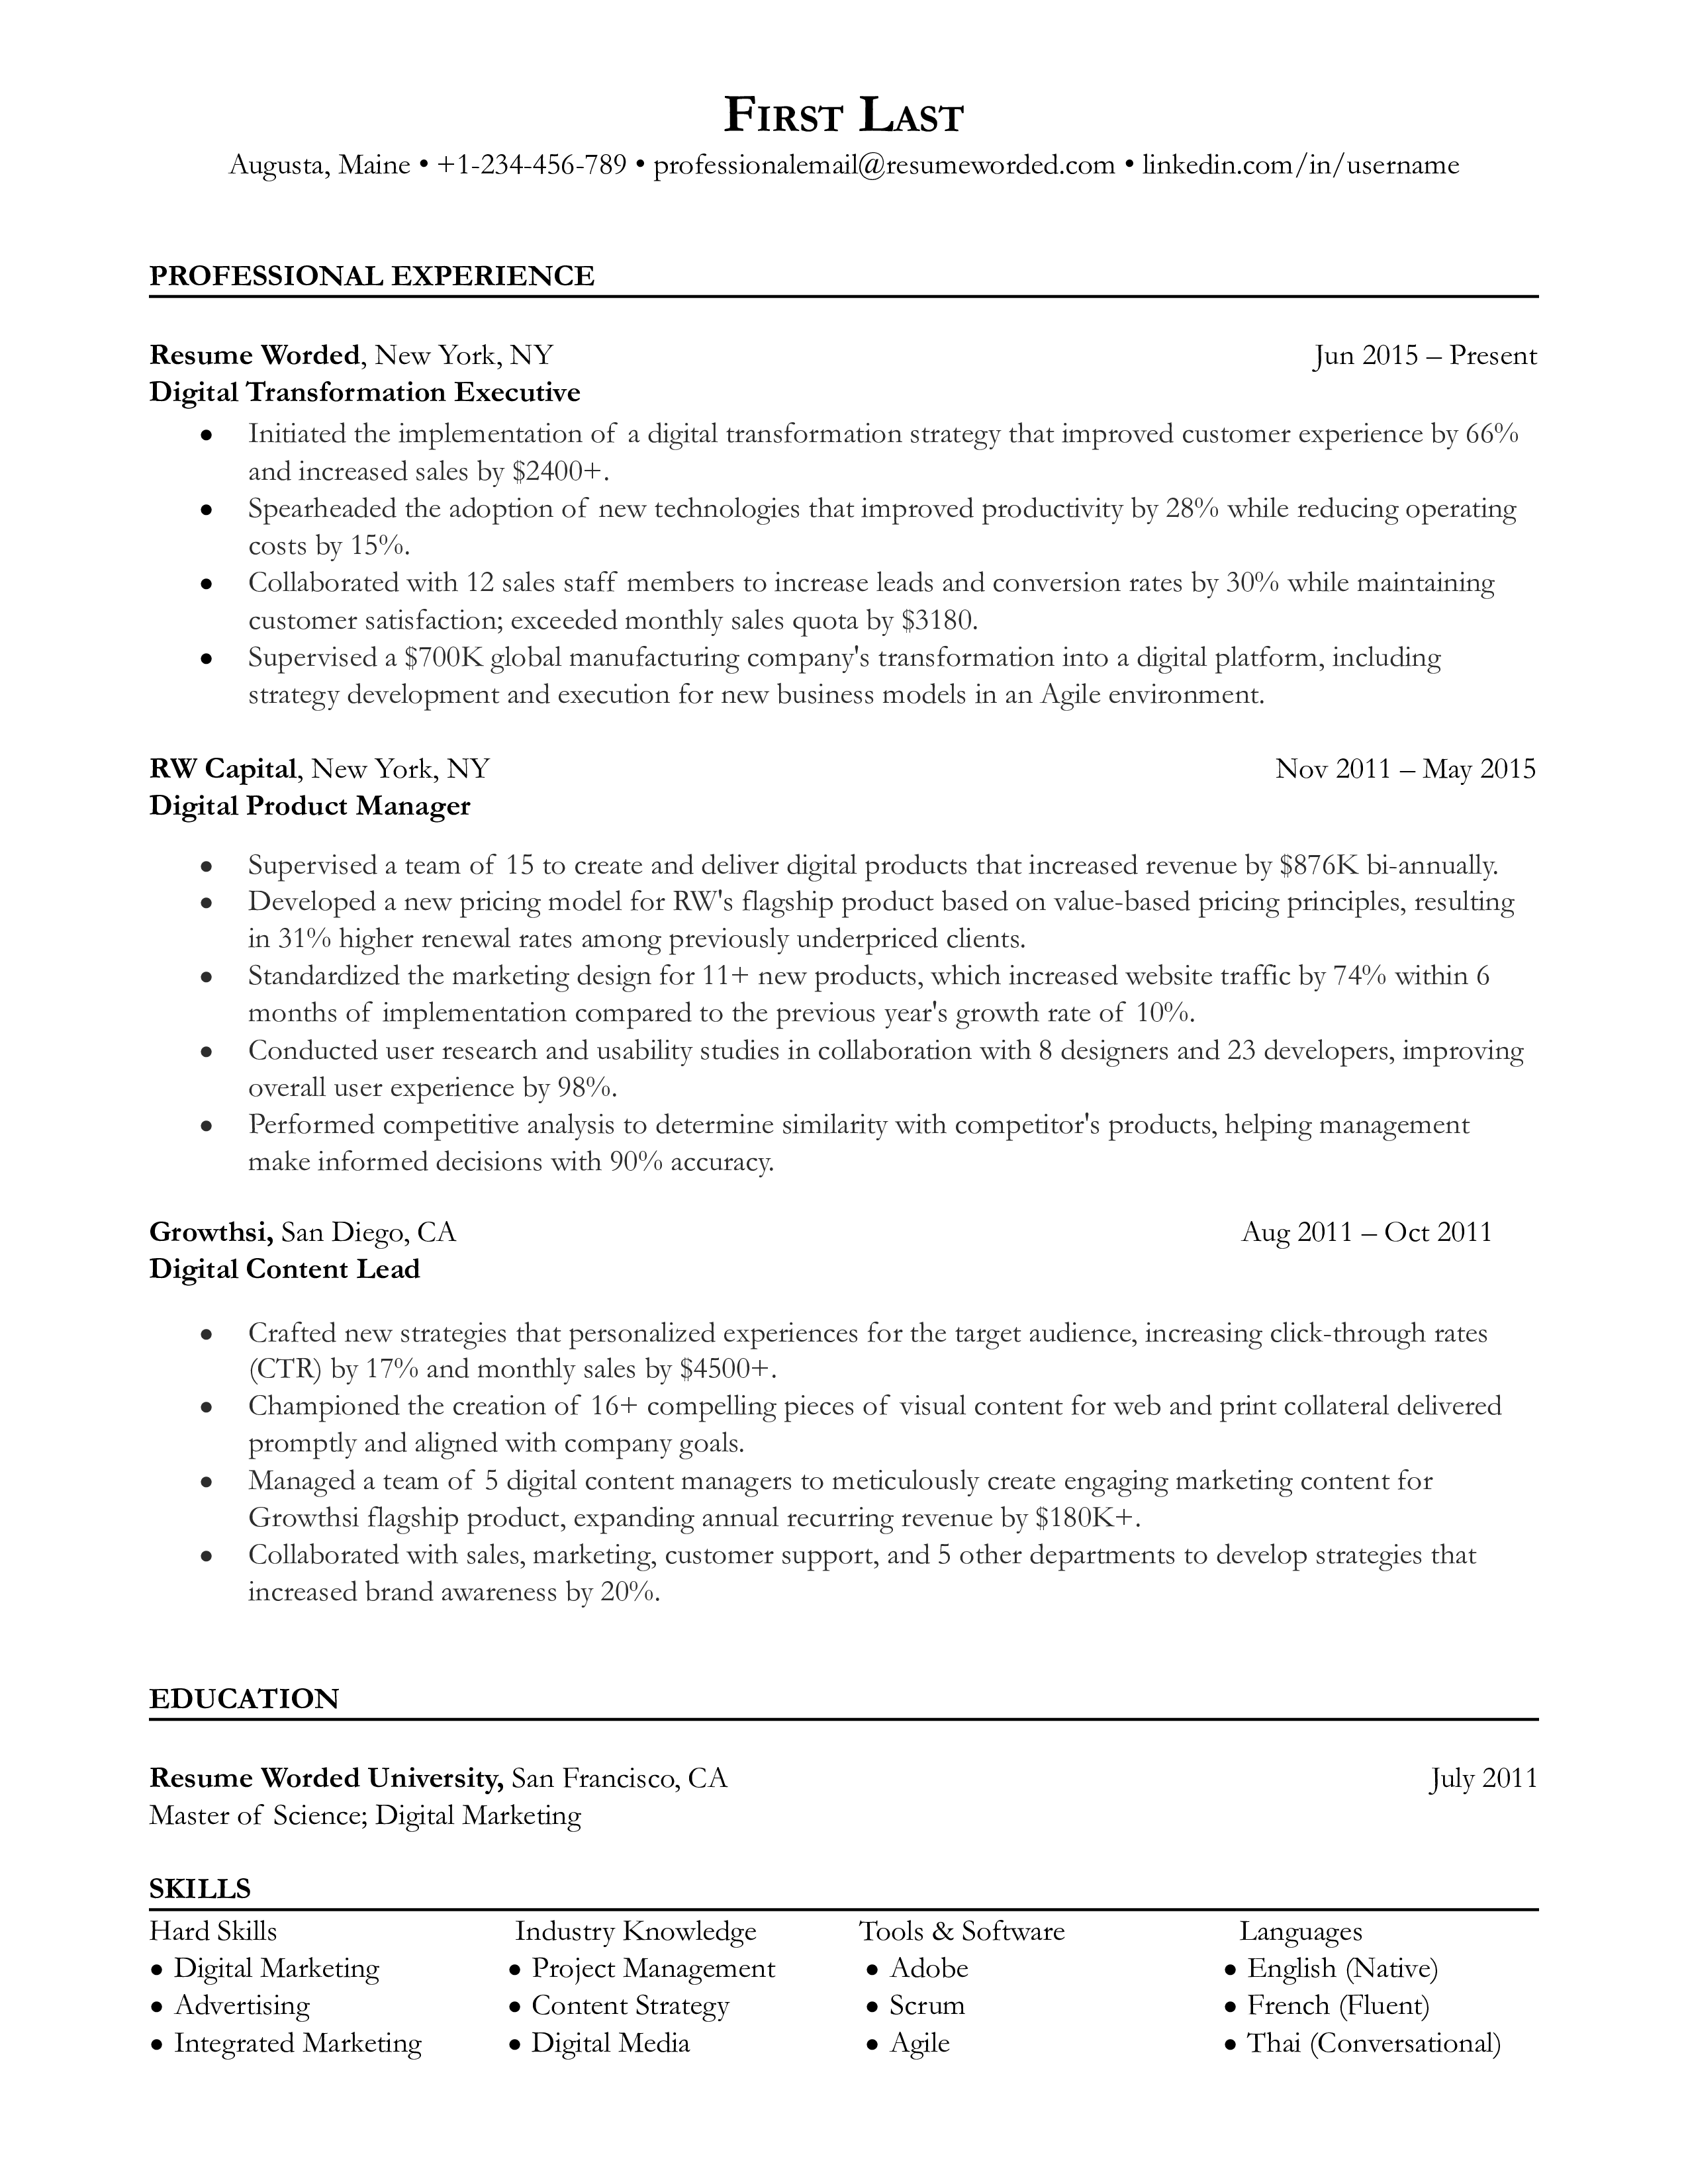 A digital transformation executive resume sample that highlights the applicant’s specializations and experience.